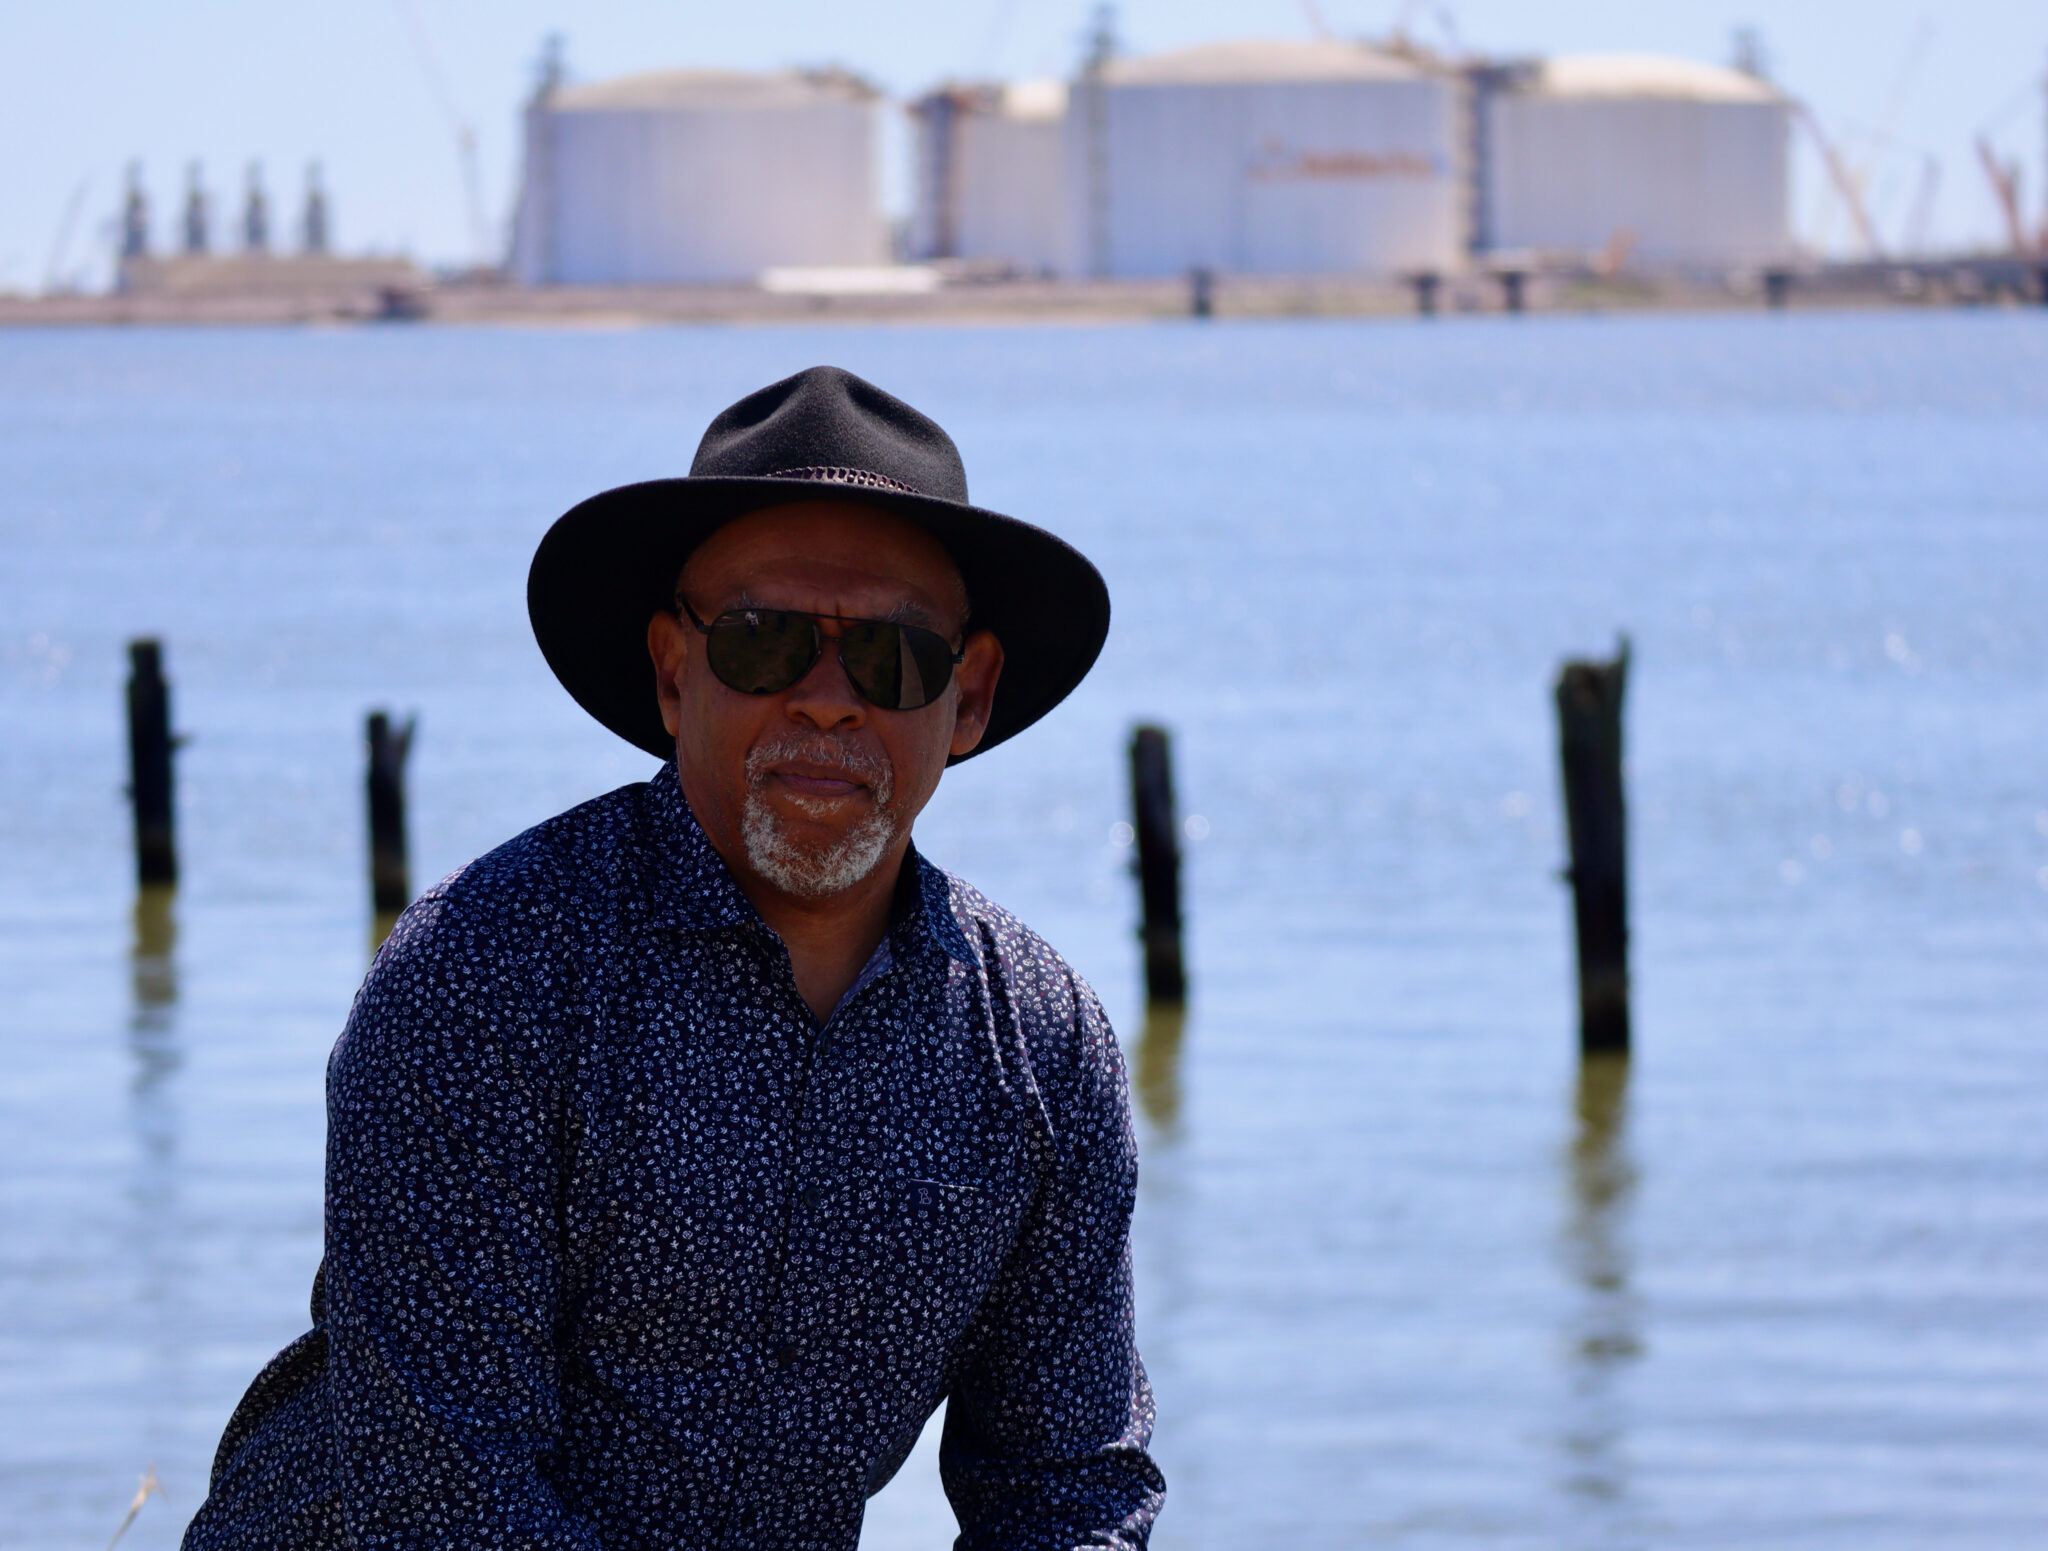 John Beard Jr., the founder and executive director of the Port Arthur Community Action Network, stands in front of the ExxonMobil and QatarEnergy’s Golden Pass LNG facility, just south of Port Arthur, Texas. Beard is a retired refinery worker who first challenged the Port Arthur LNG emissions permit. Credit: James Bruggers/Inside Climate News